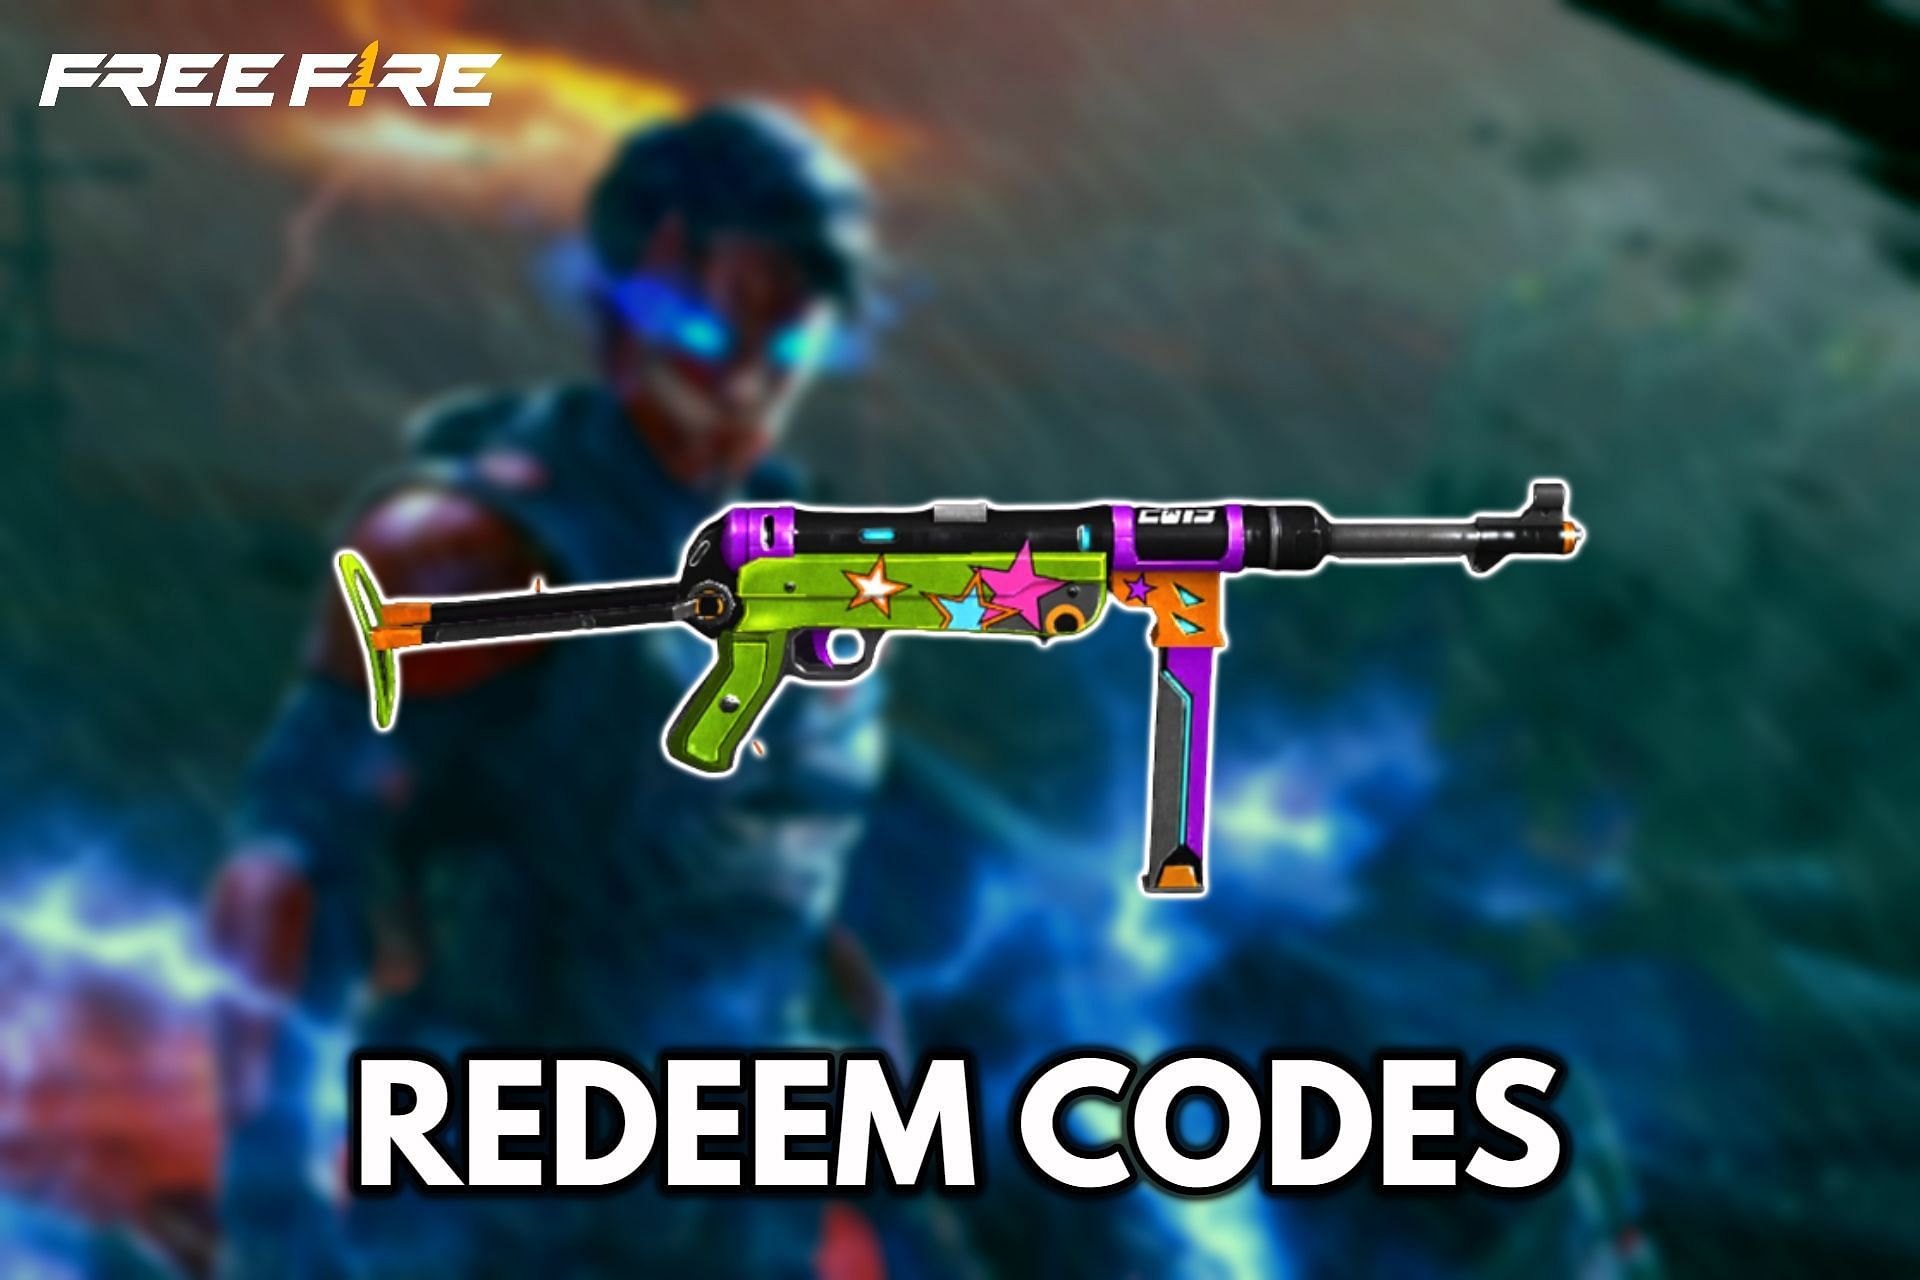 Redeem codes have proven themselves as one of the best ways to get free rewards (Image via Sportskeeda)